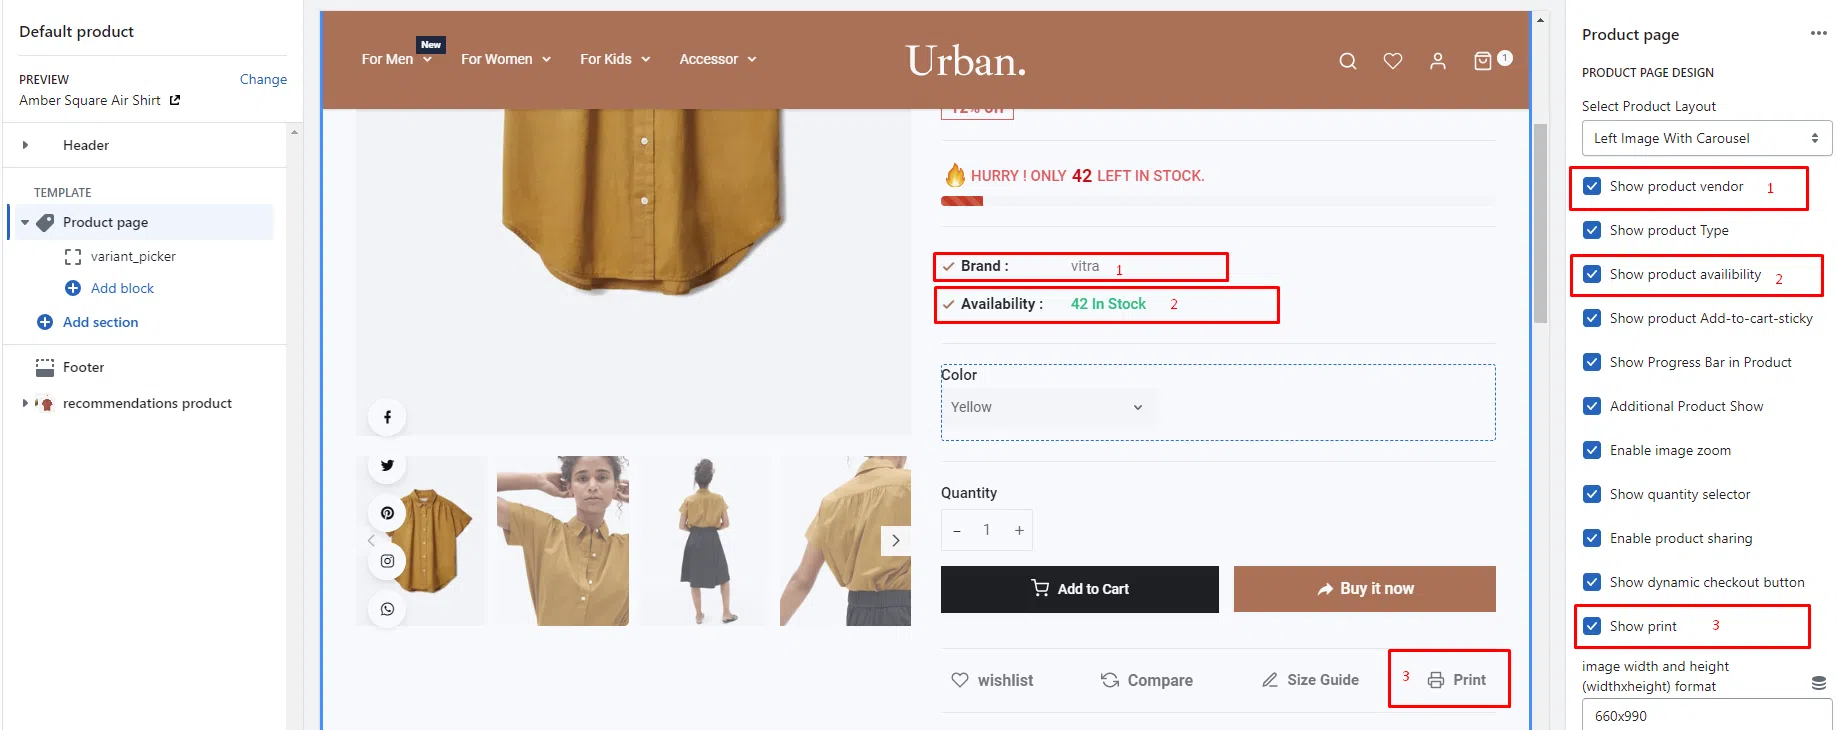 Shopify - How to hide the items "Brand", "Availability" and "Print" - TemplateTrip